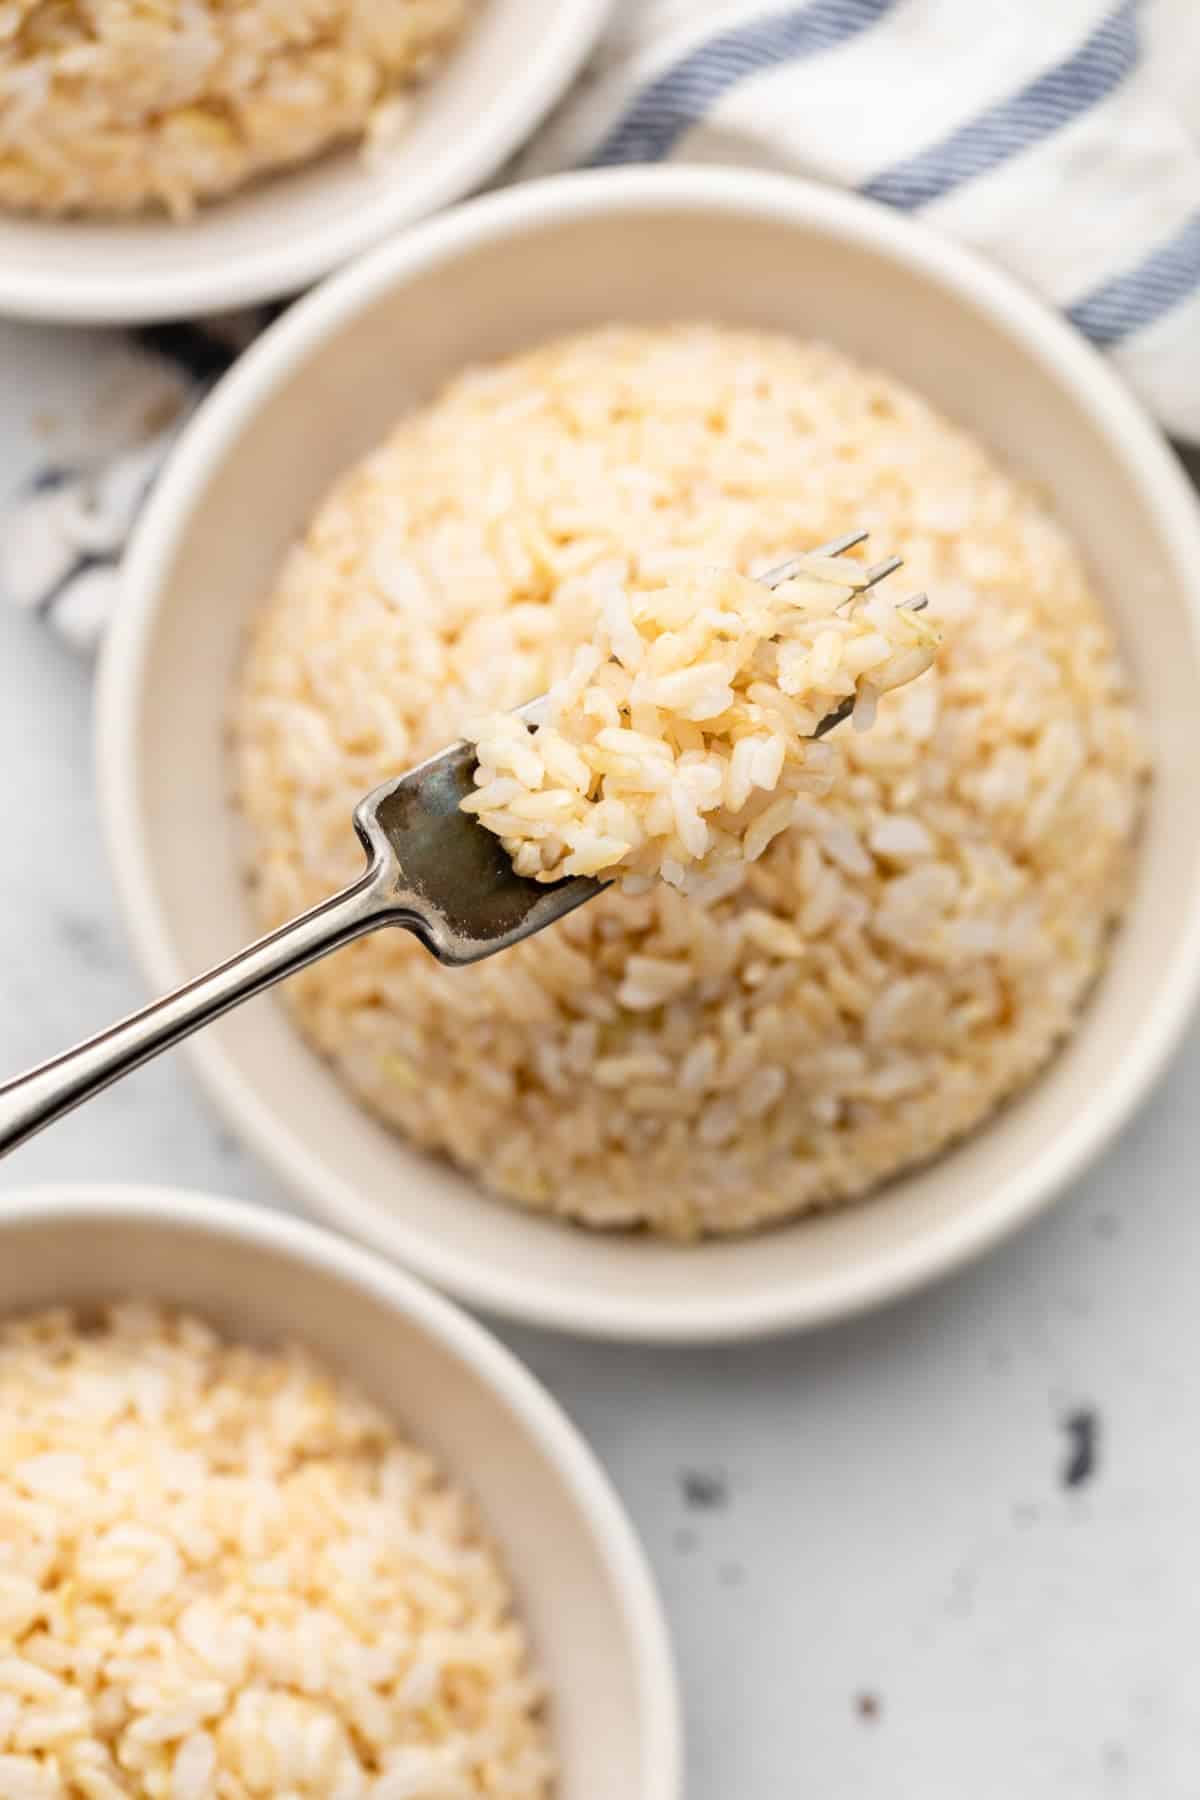 Brown rice in a bowl on a fork.